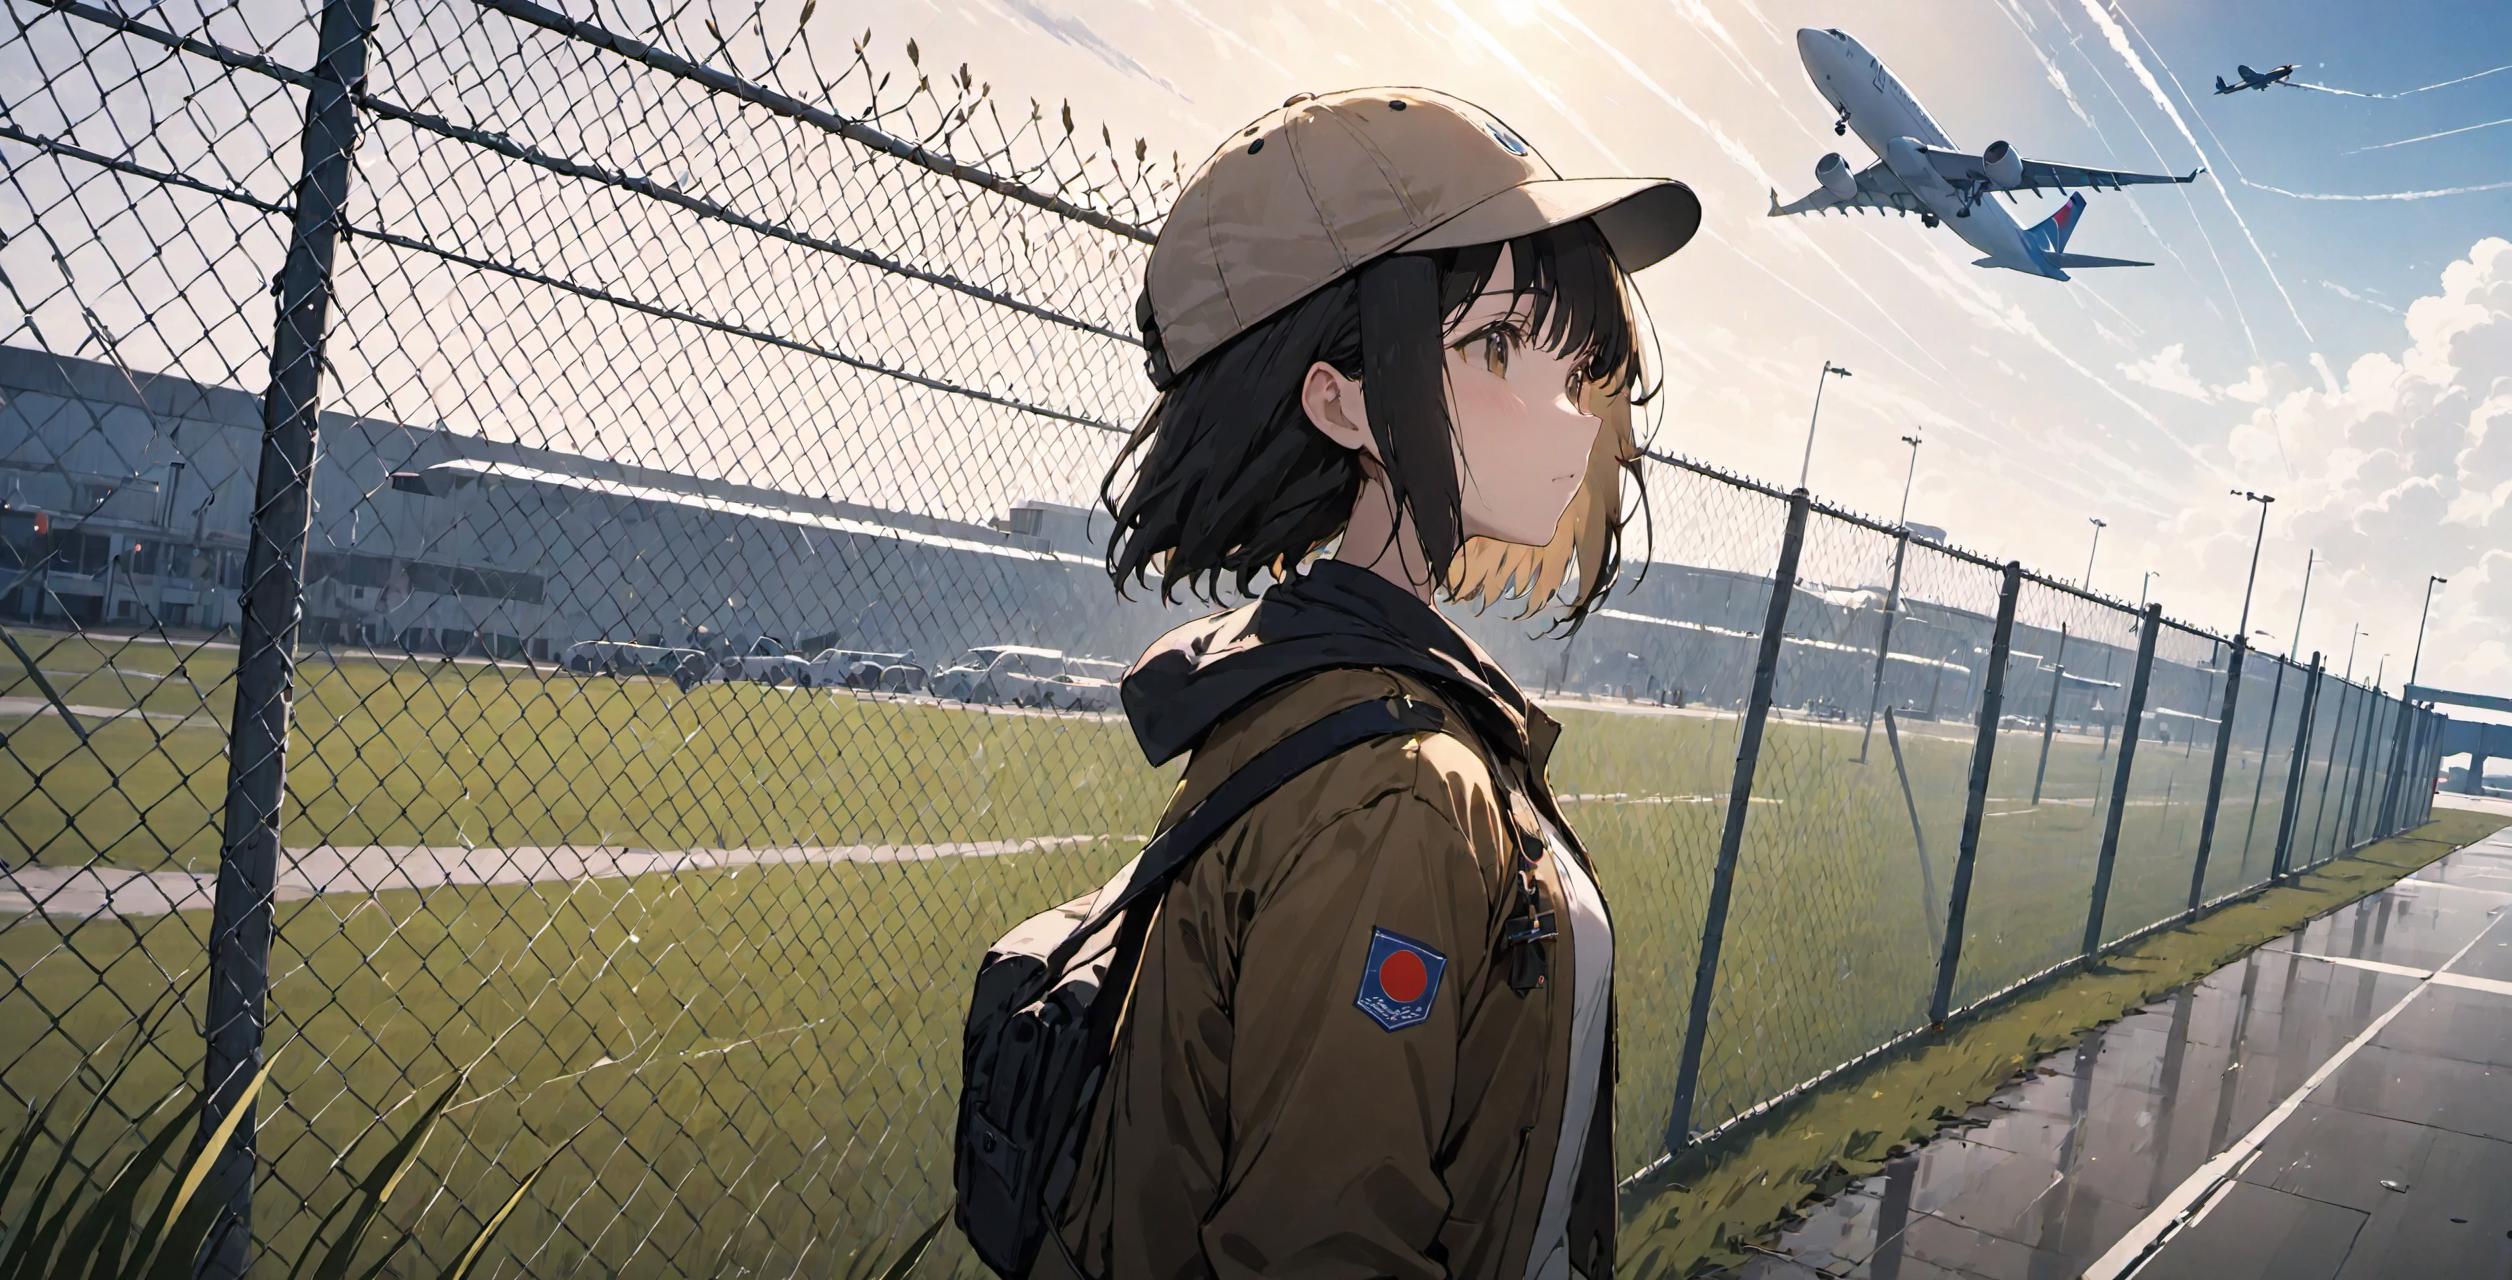 A woman with a backpack and hat standing by a fence looking at an airplane.